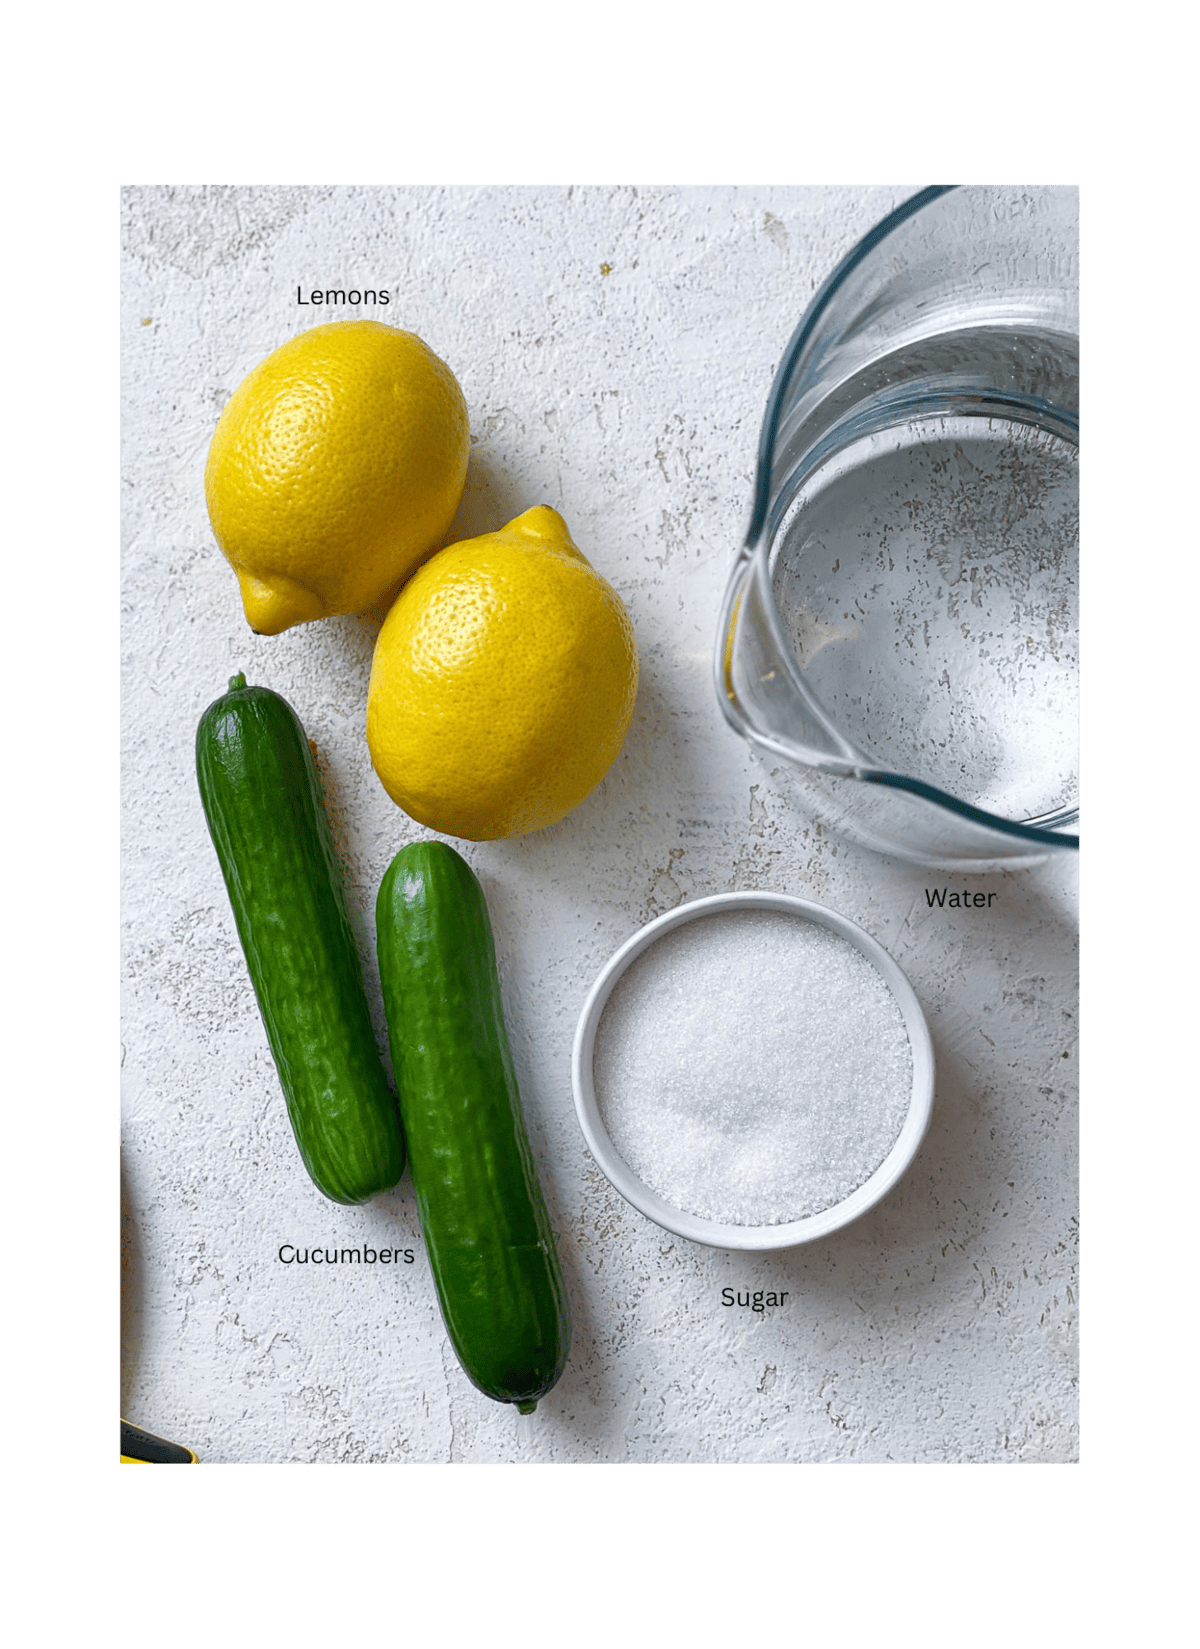 ingredients for Cucumber Lemonade against a white surface